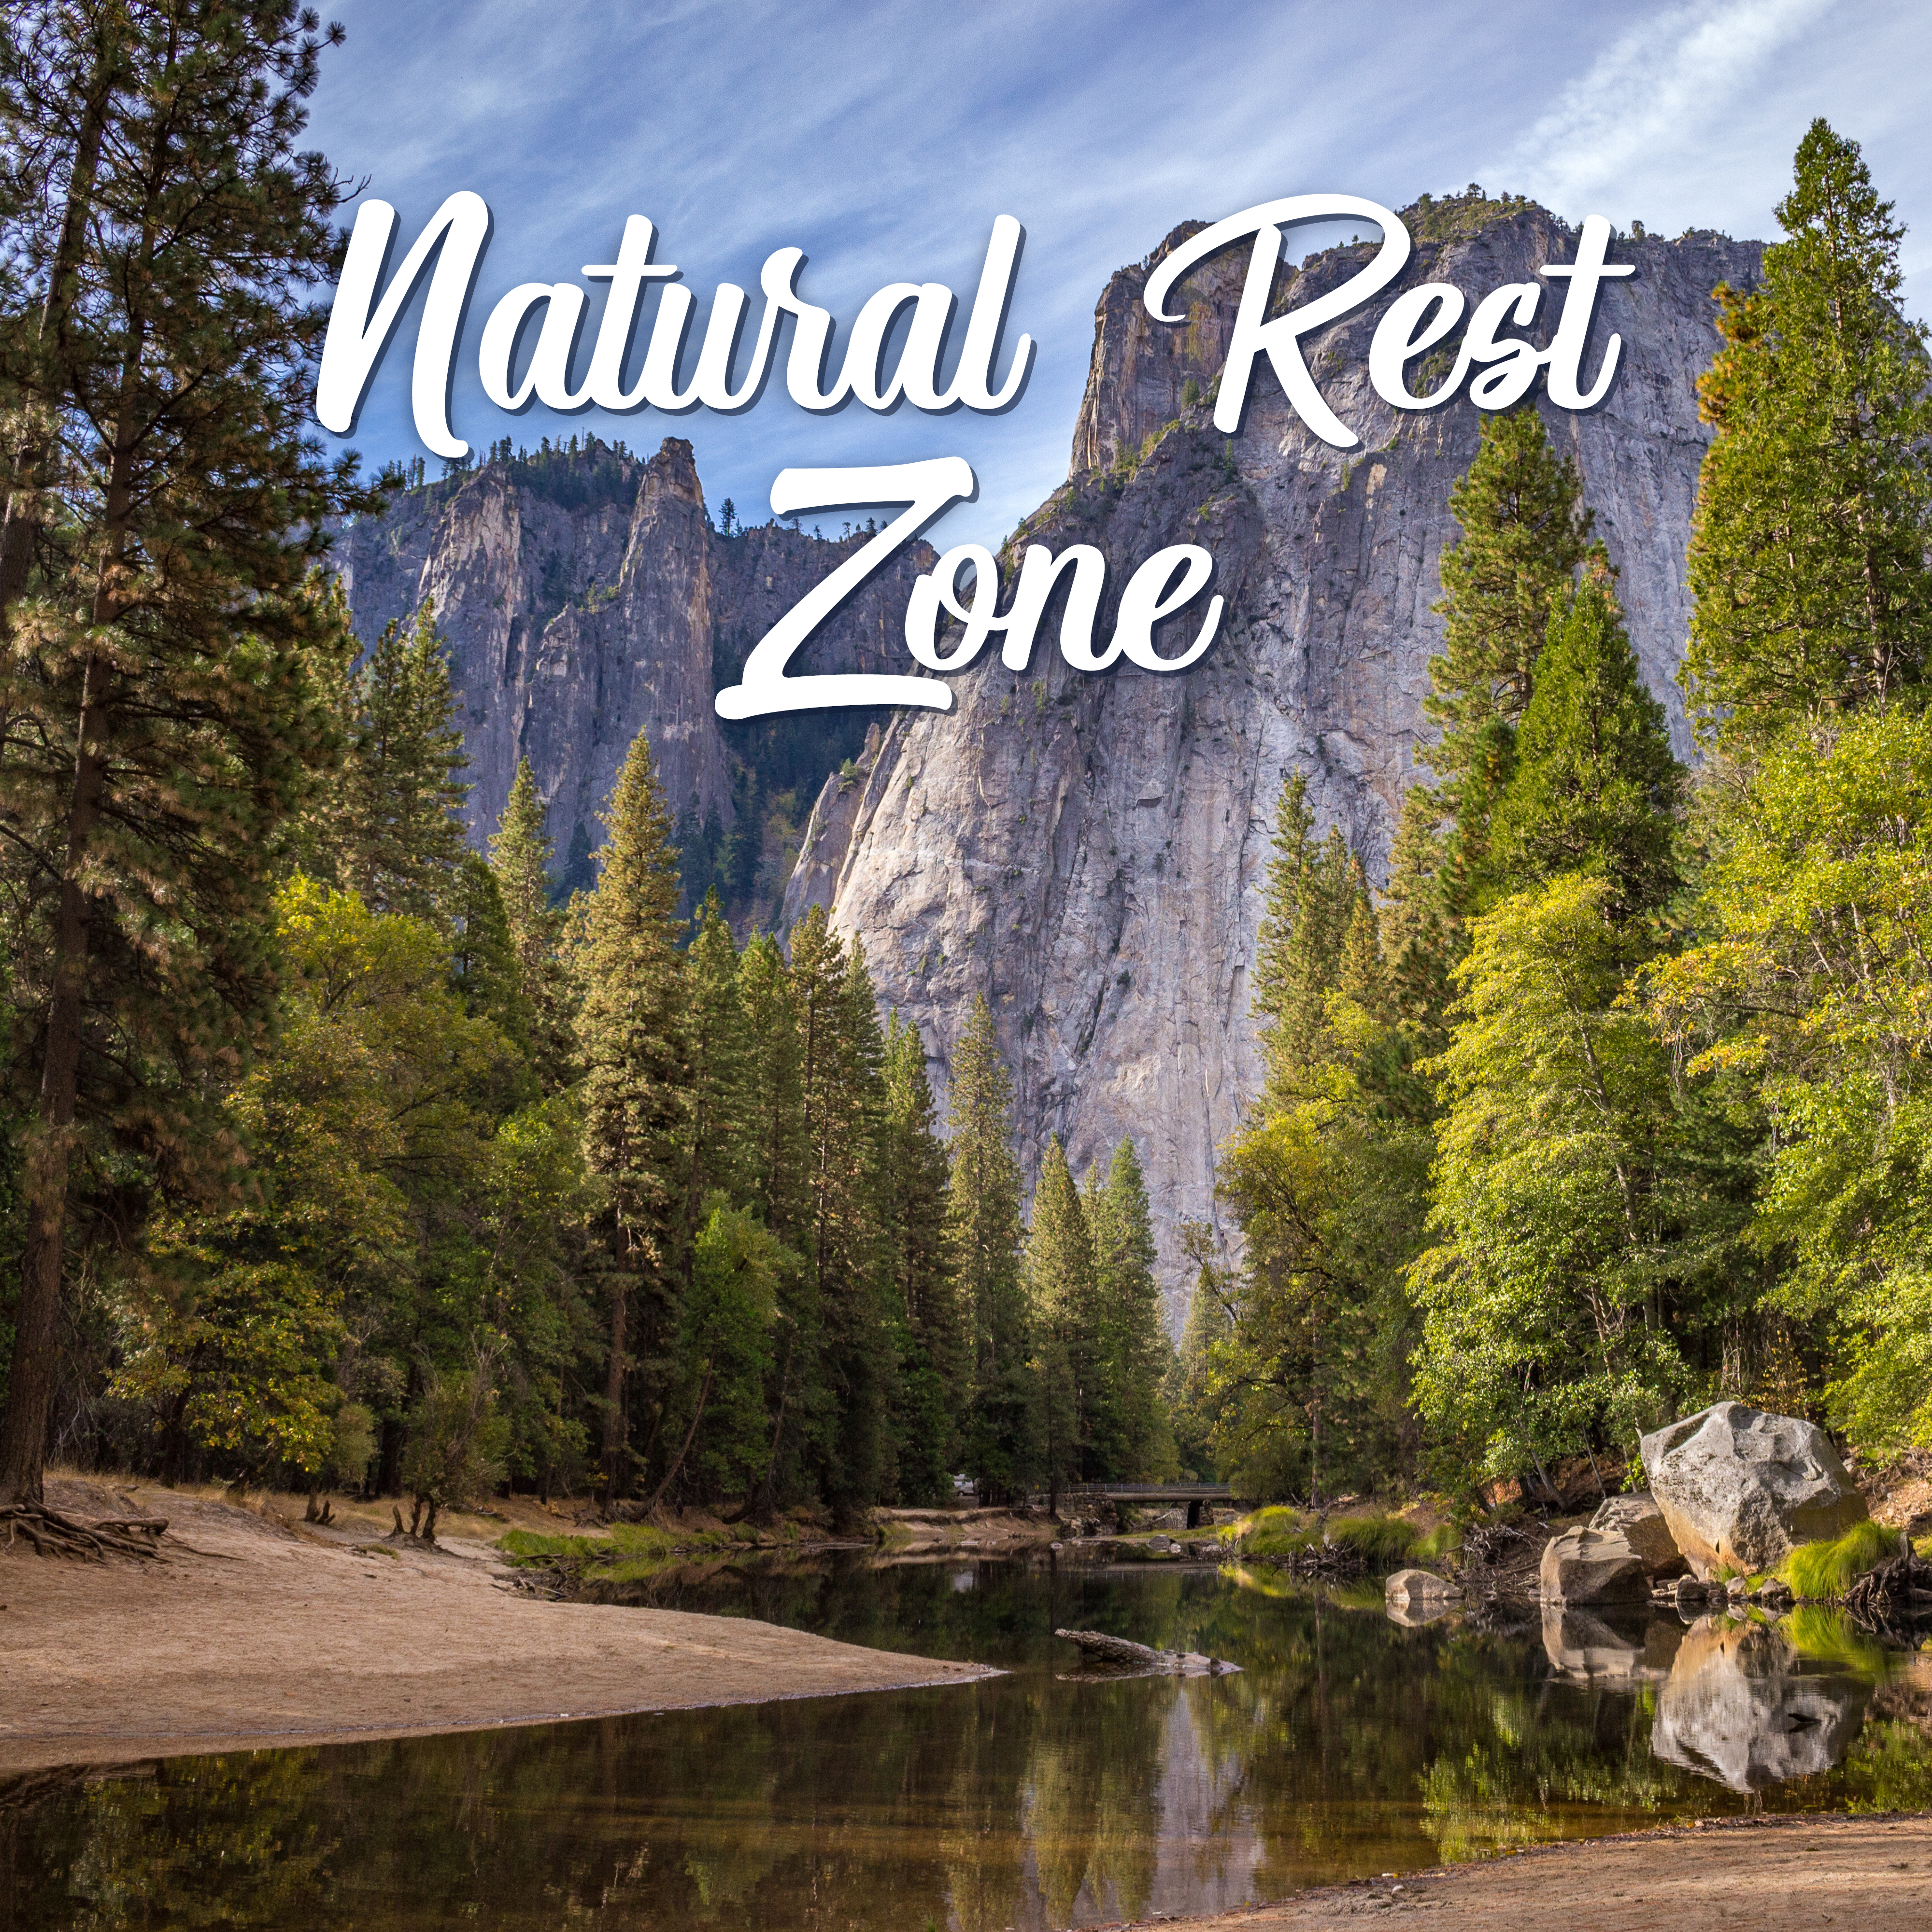 Natural Rest Zone